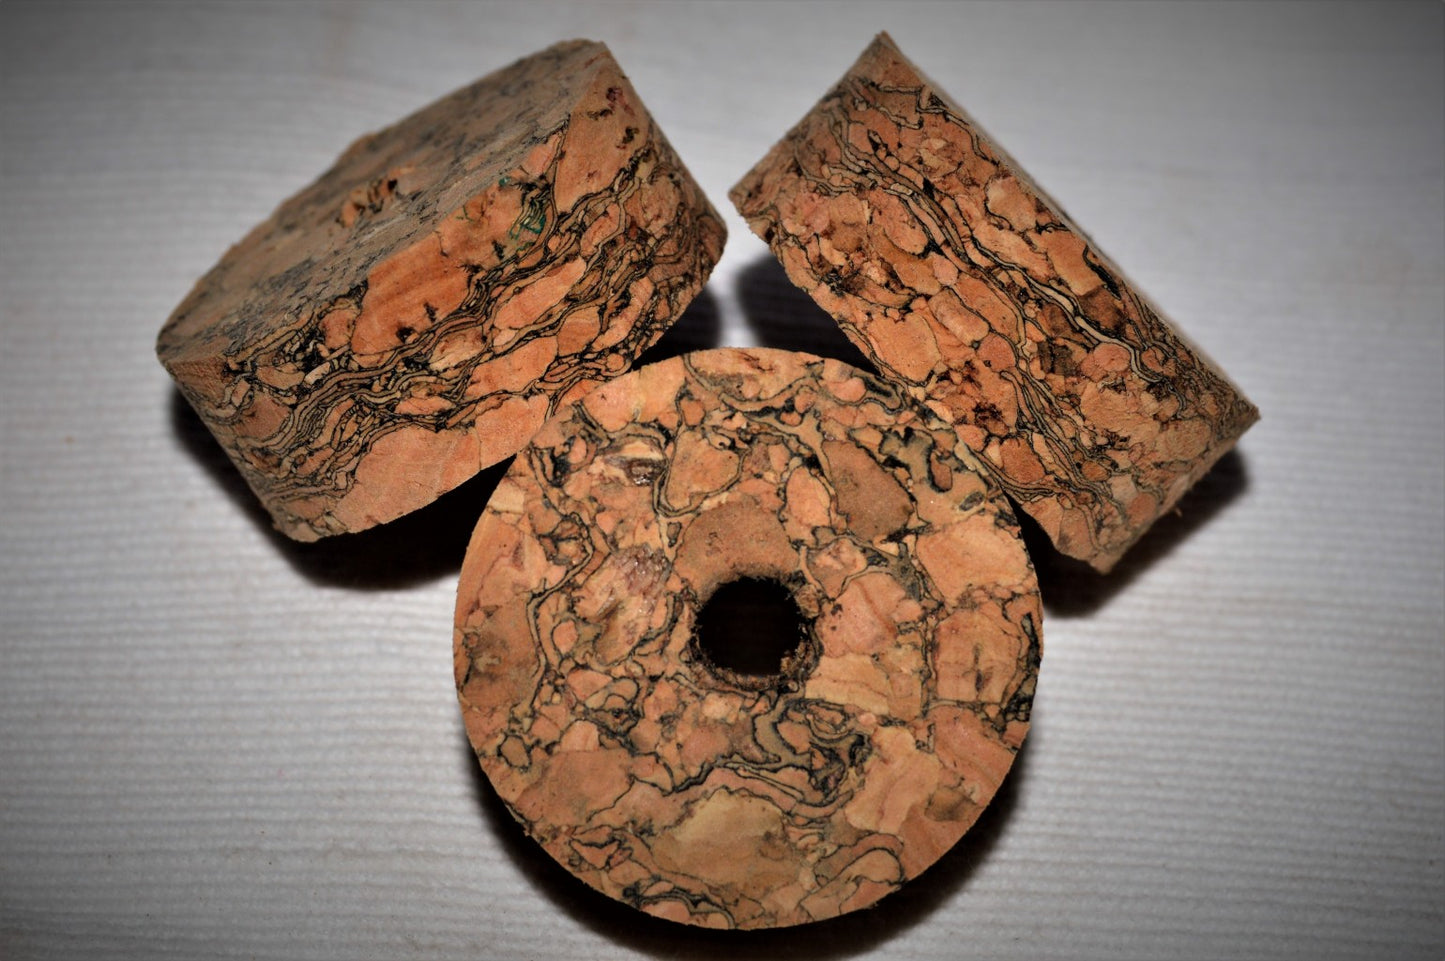 Cork ring - Burl Gray  1 1/4" x 1/2" = 32 x 12.7mm  with hole 1/4" = 6 mm